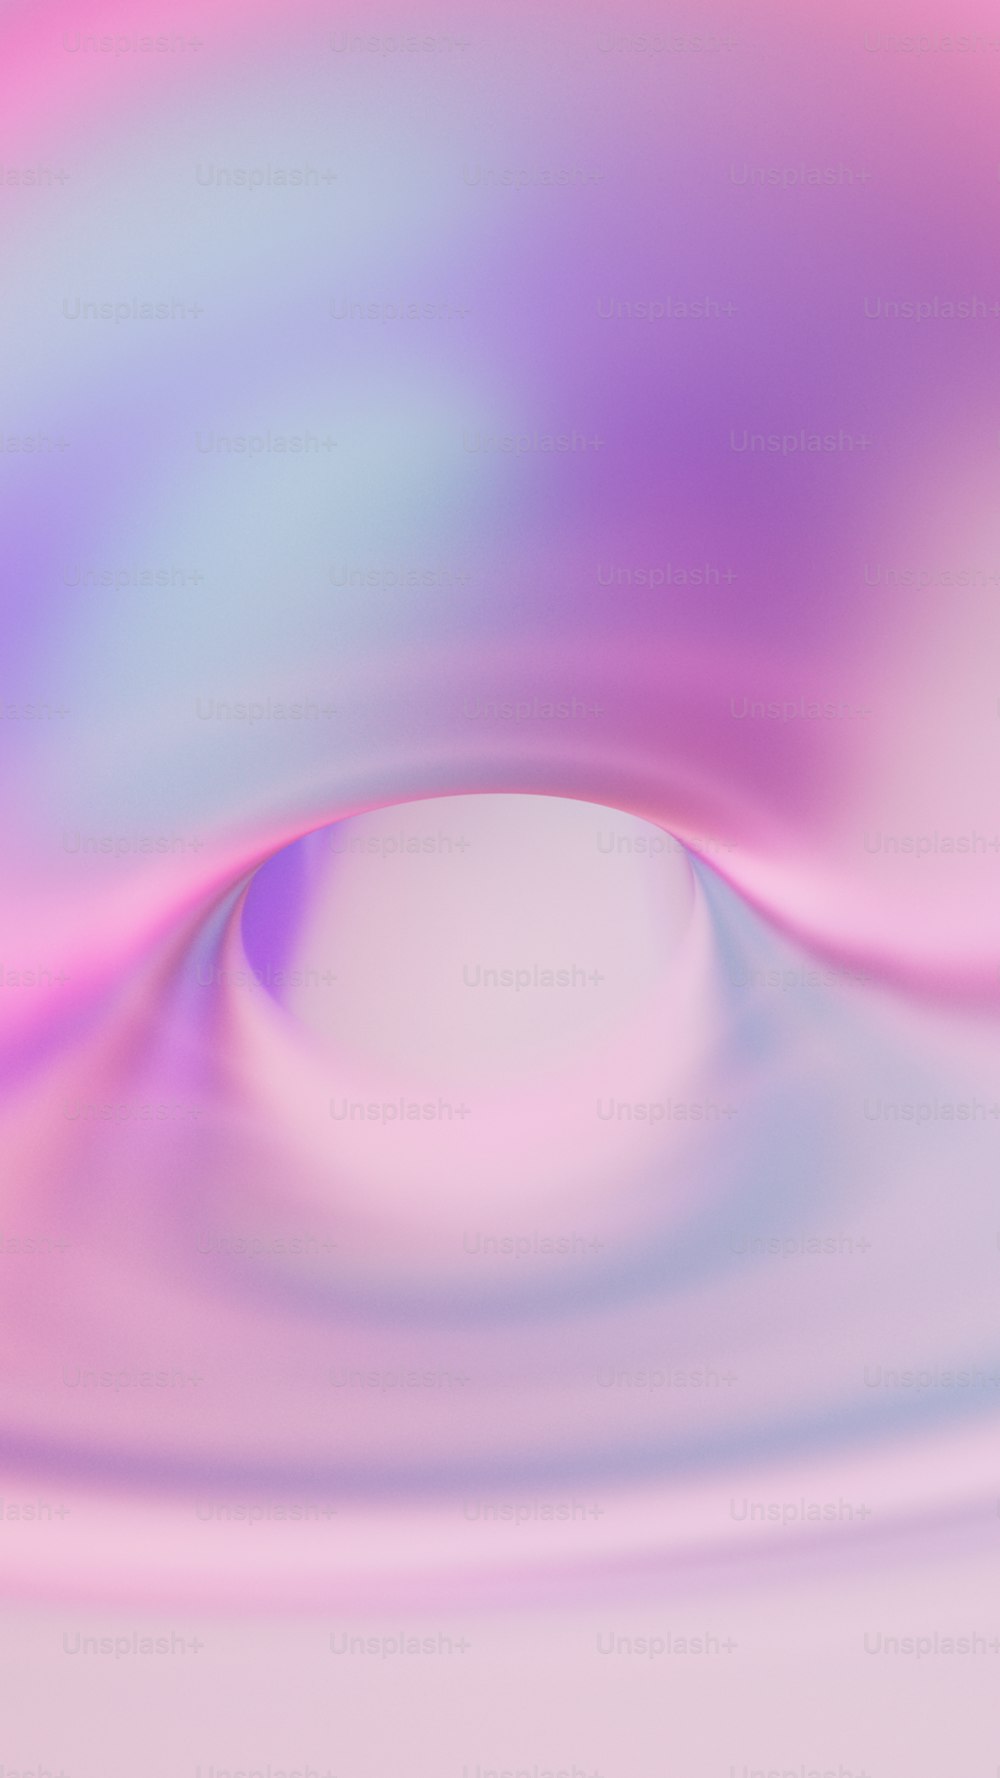 a close up of a pink and white circle